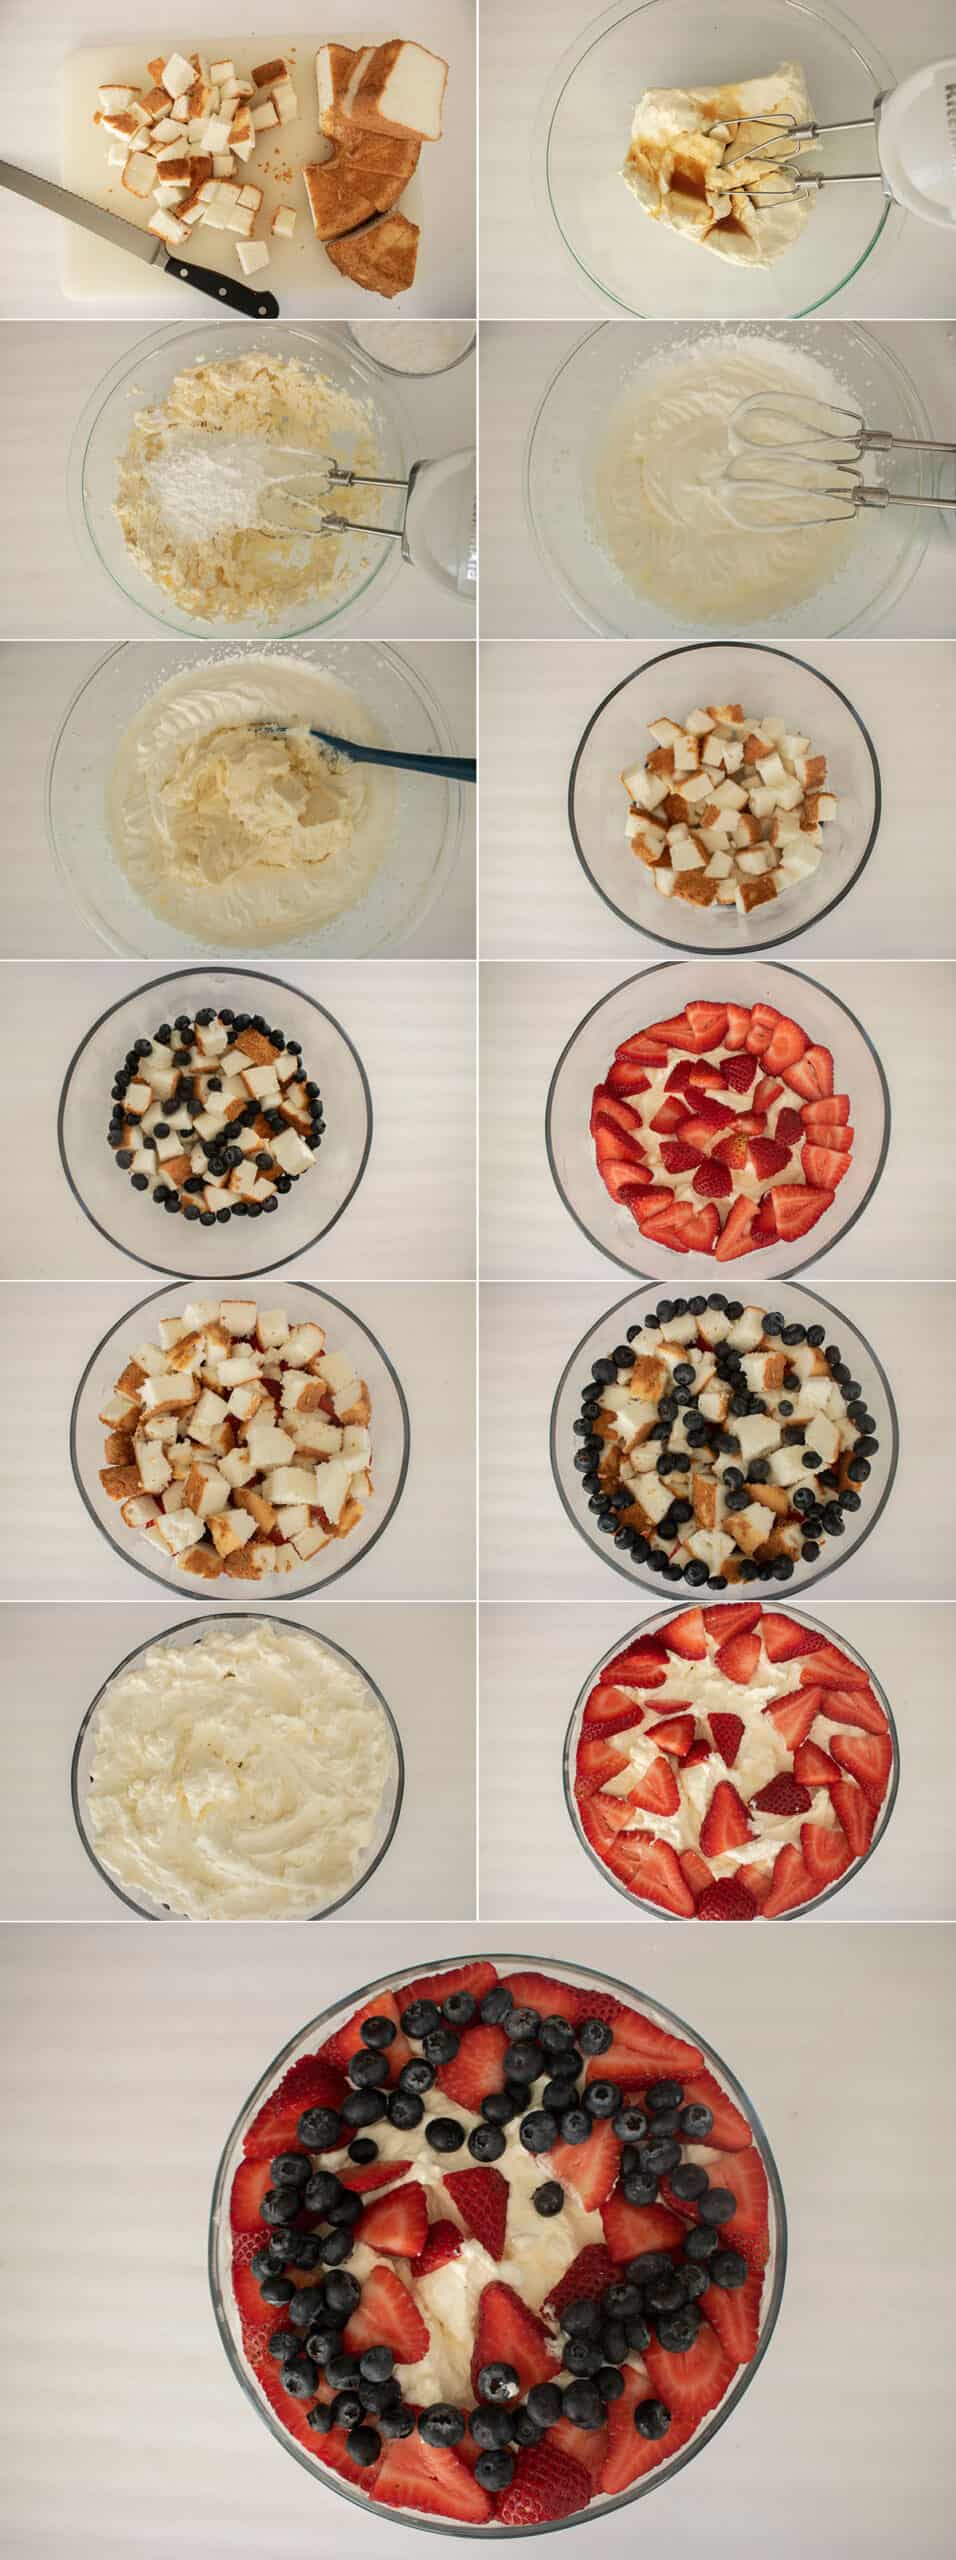 Process of making trifle filling and layers.